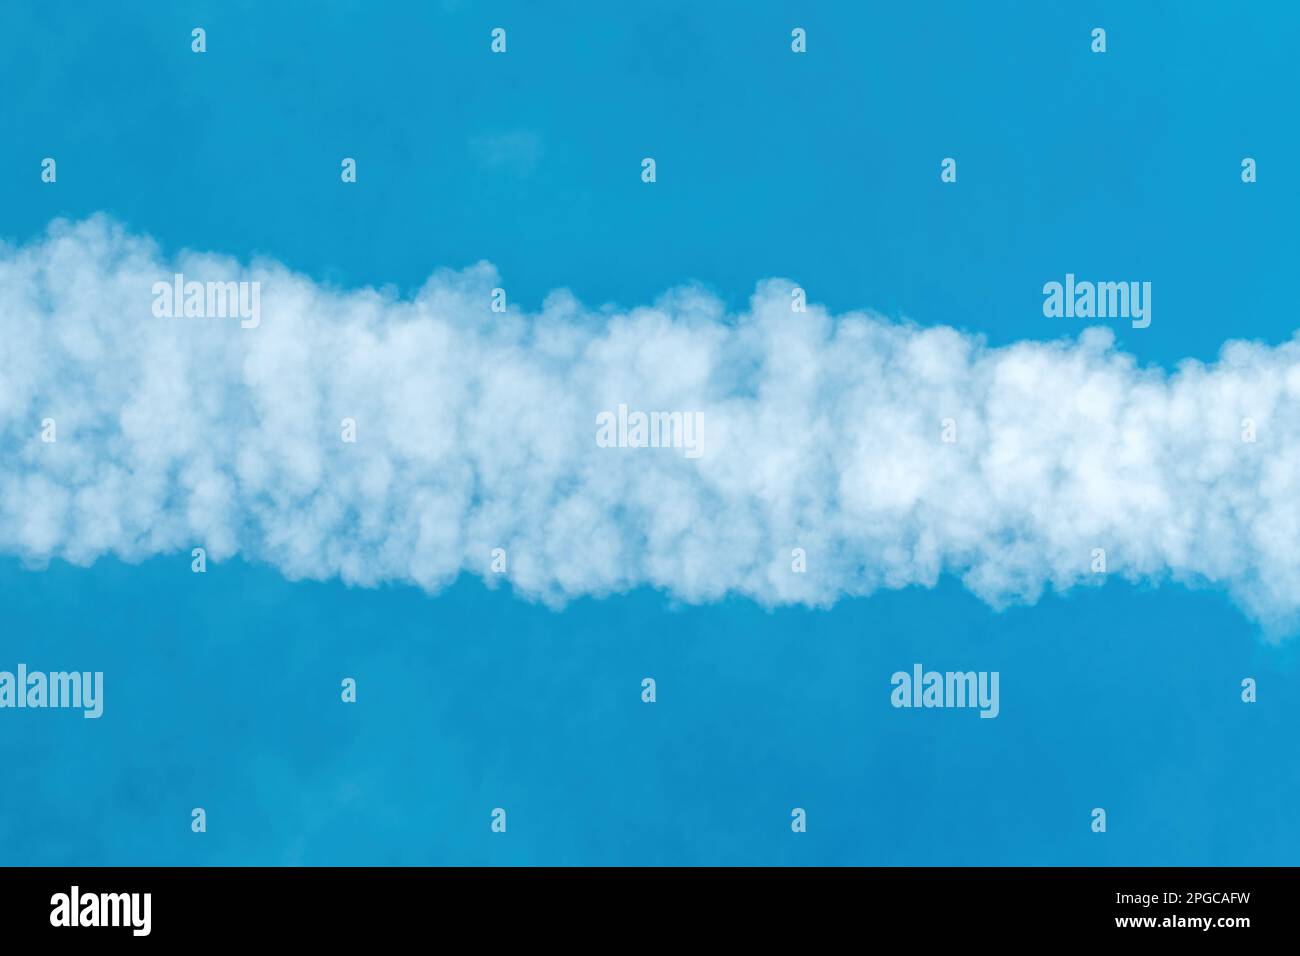 Airplane contrail pattern across the blue sky, directly below Stock Photo